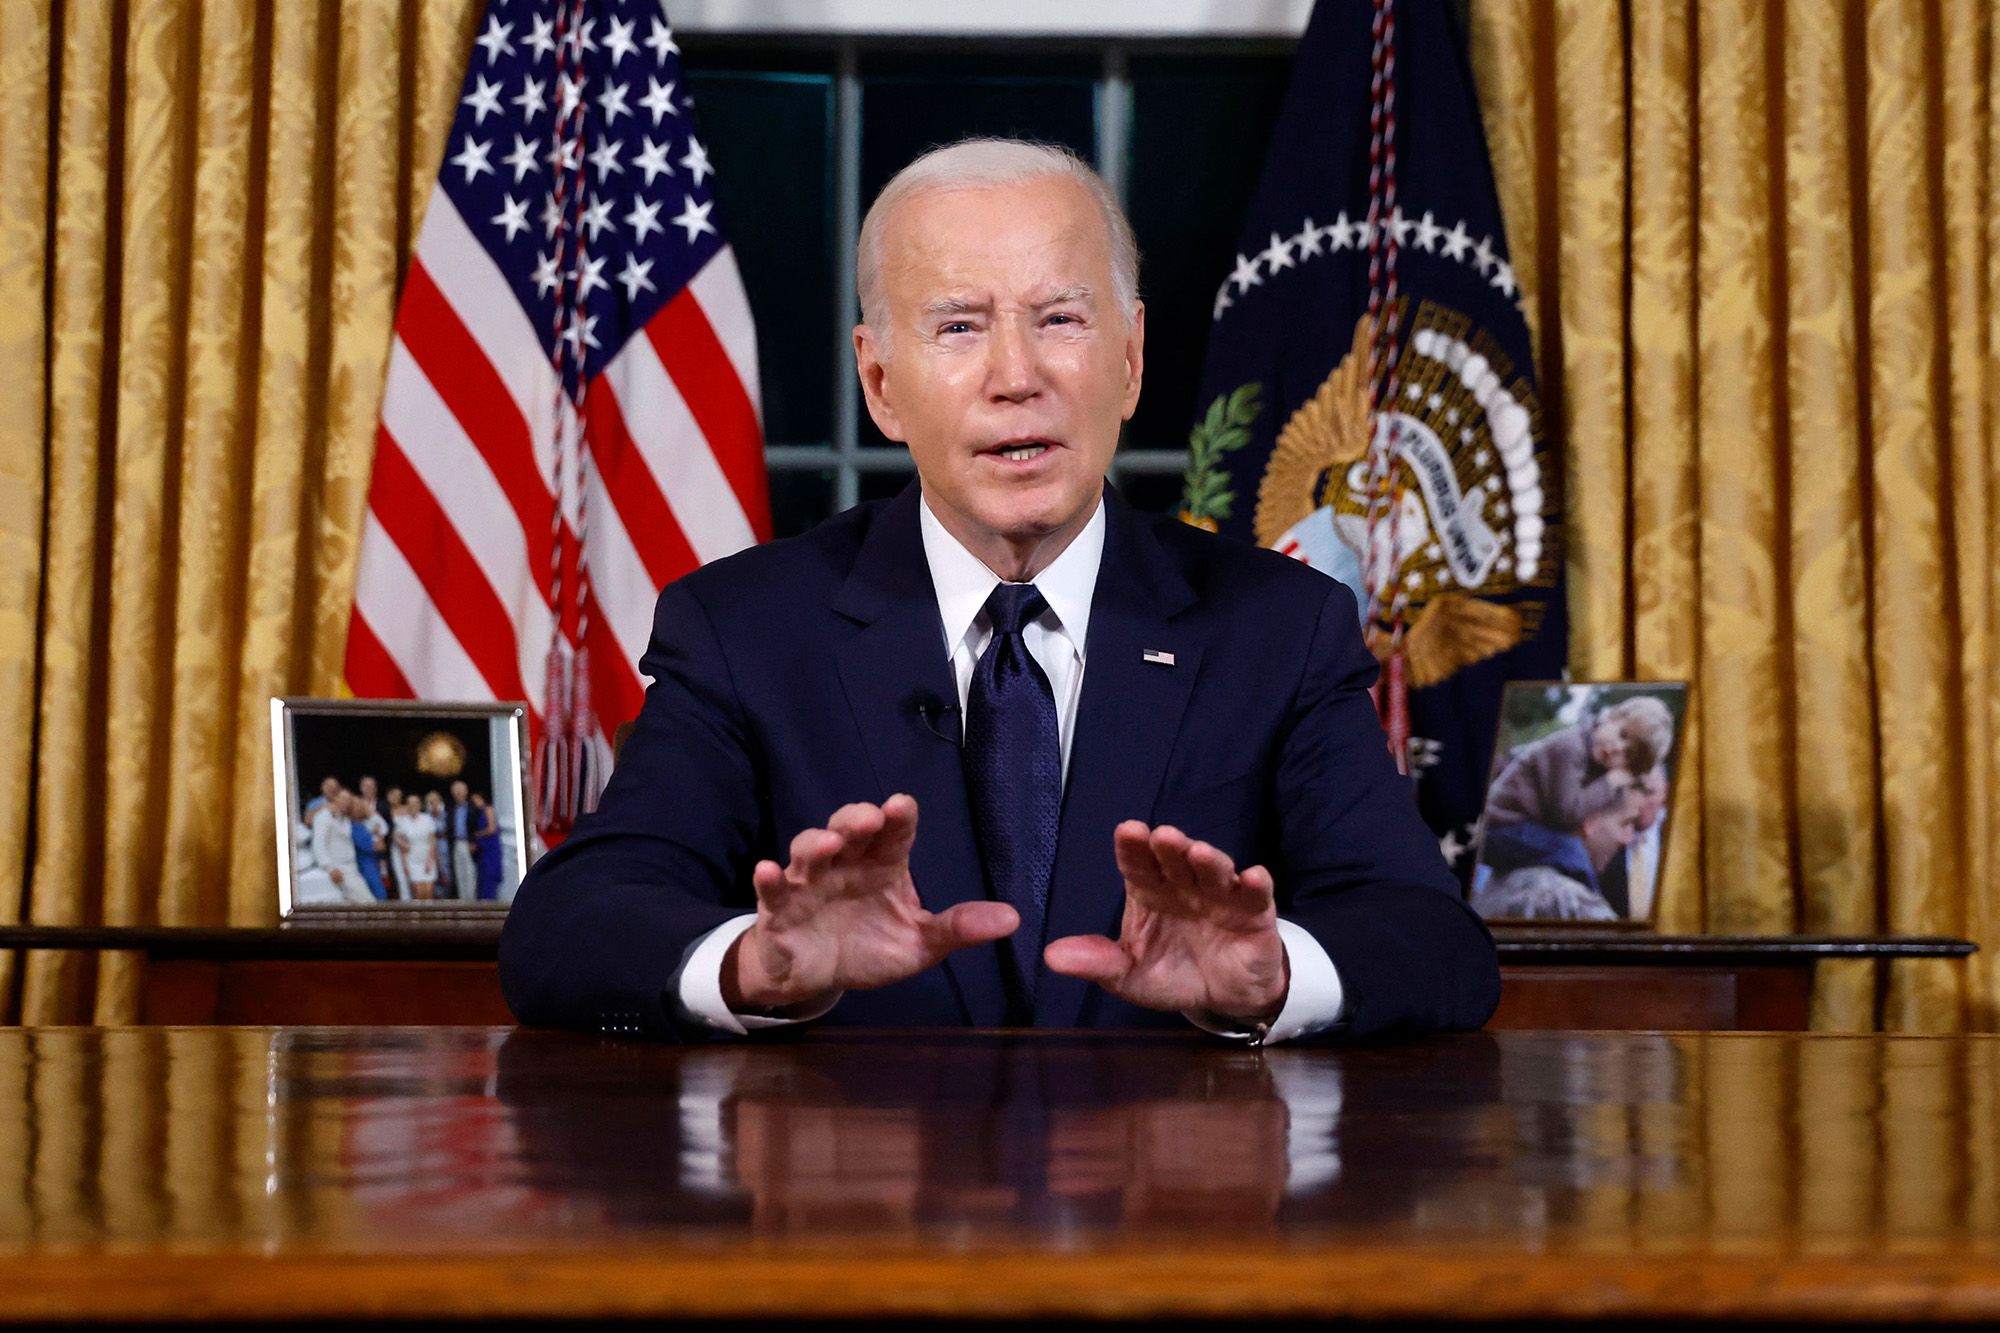 Ongoing tensions as Biden administration seeks release of detained Americans (Credits: CNN)